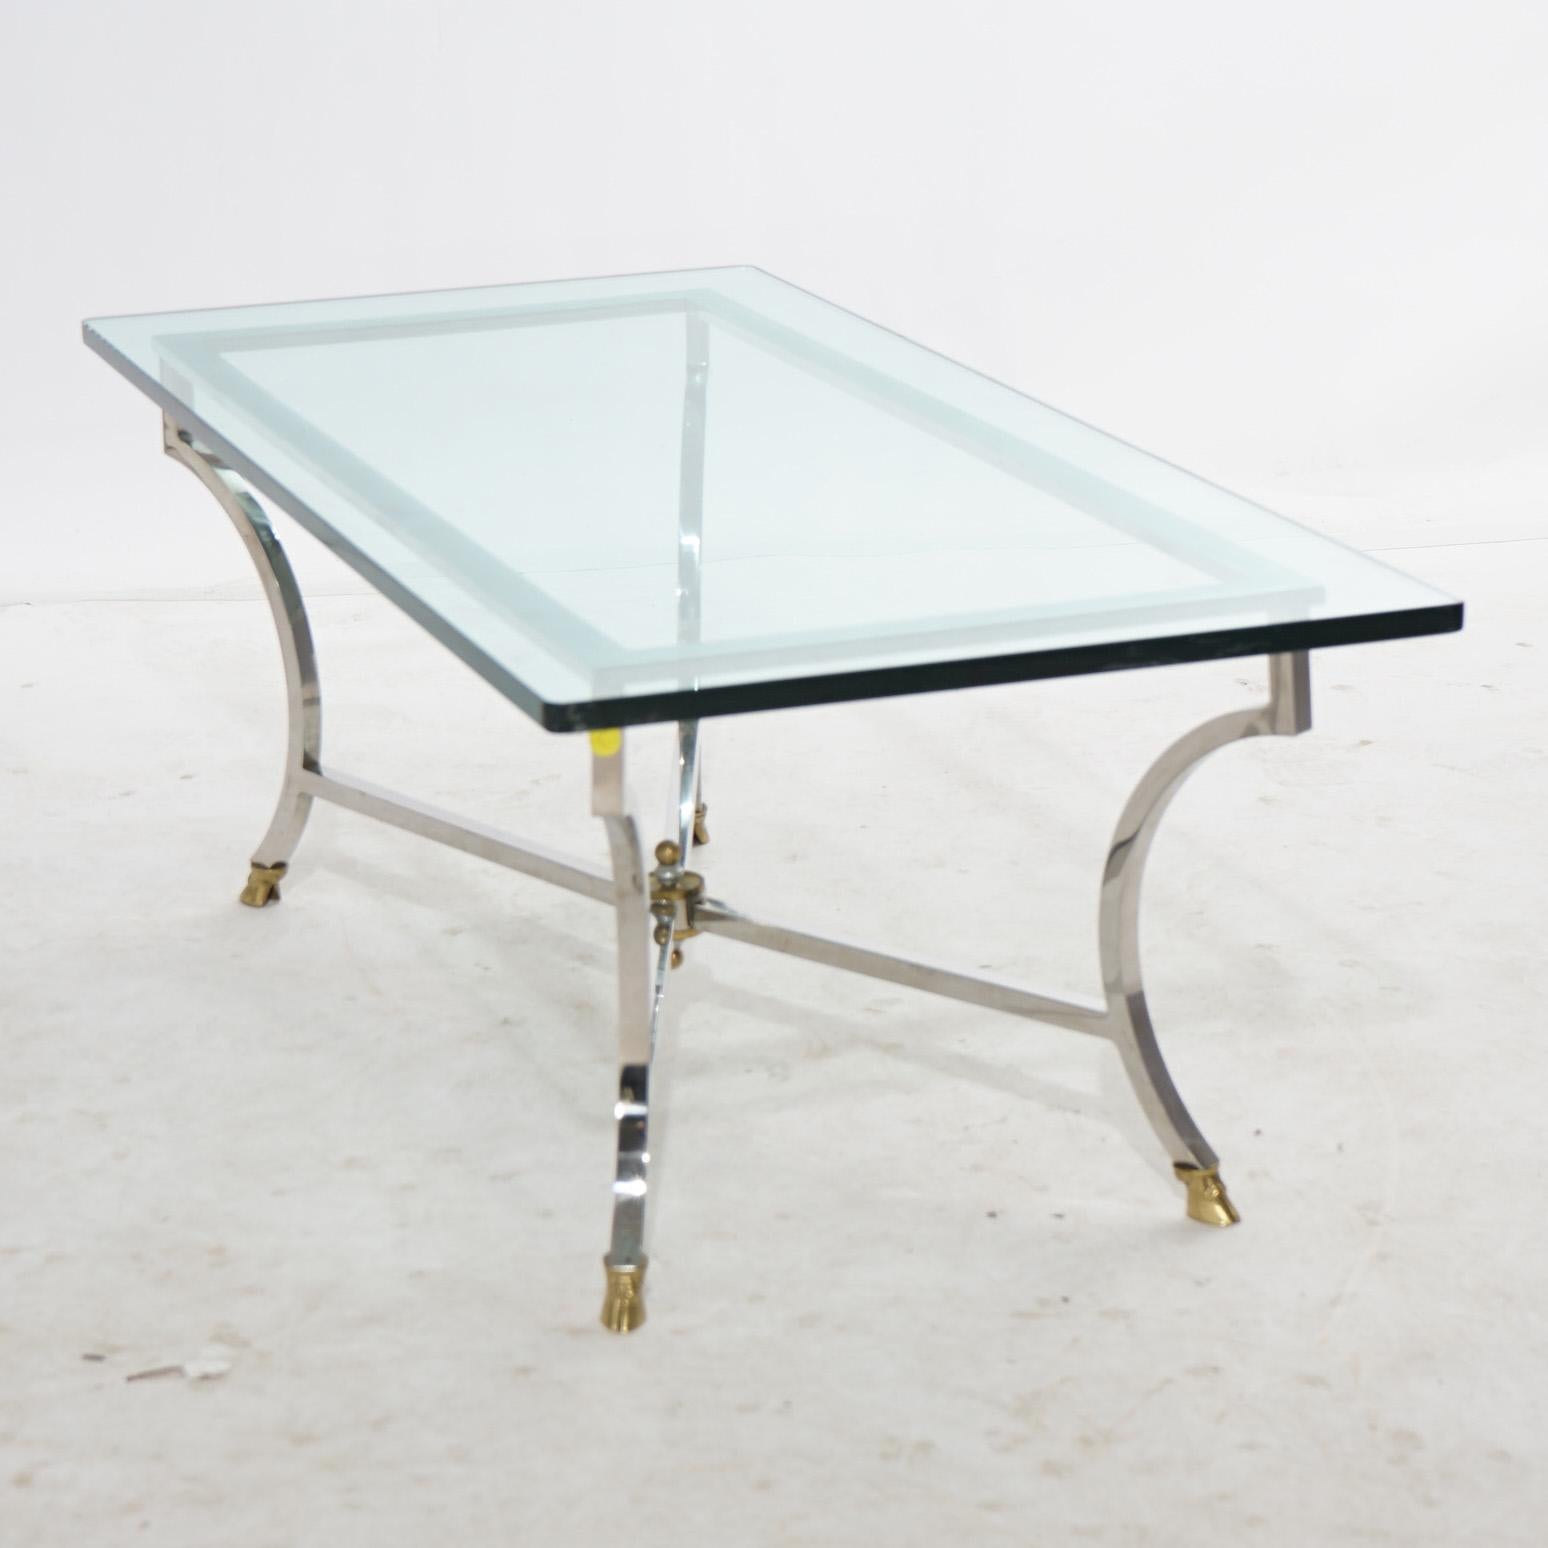 20th Century Mid Century Modern Hollywood Regency Chrome, Brass & Glass Coffee Table C1960 For Sale